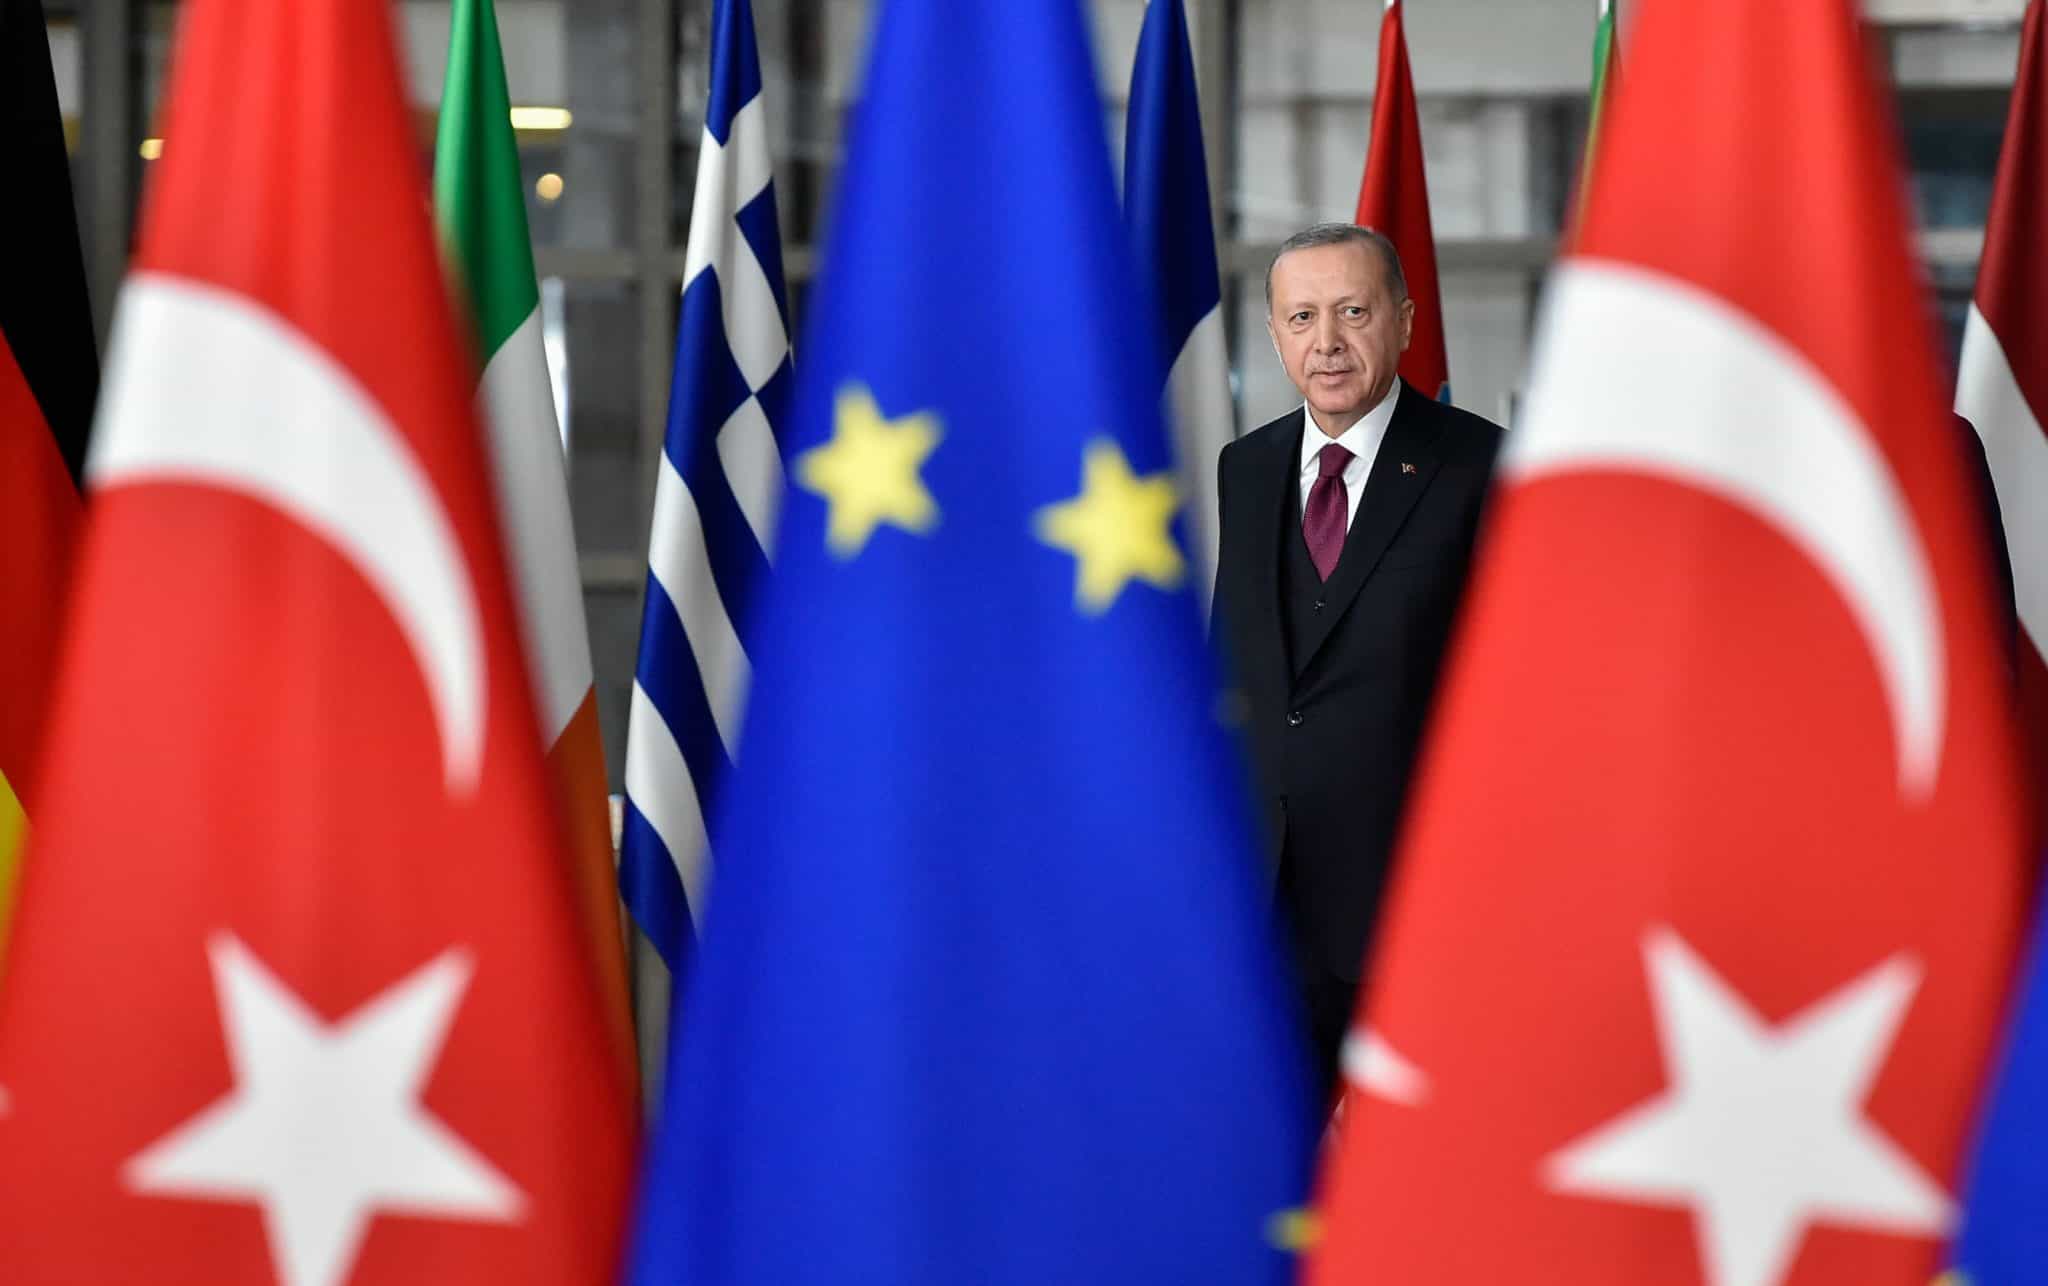 EU Turkish President Recep Tayyip Erdogan arrives before a meeting with European Commission President and EU Council President | John Thys/AFP via Getty Images